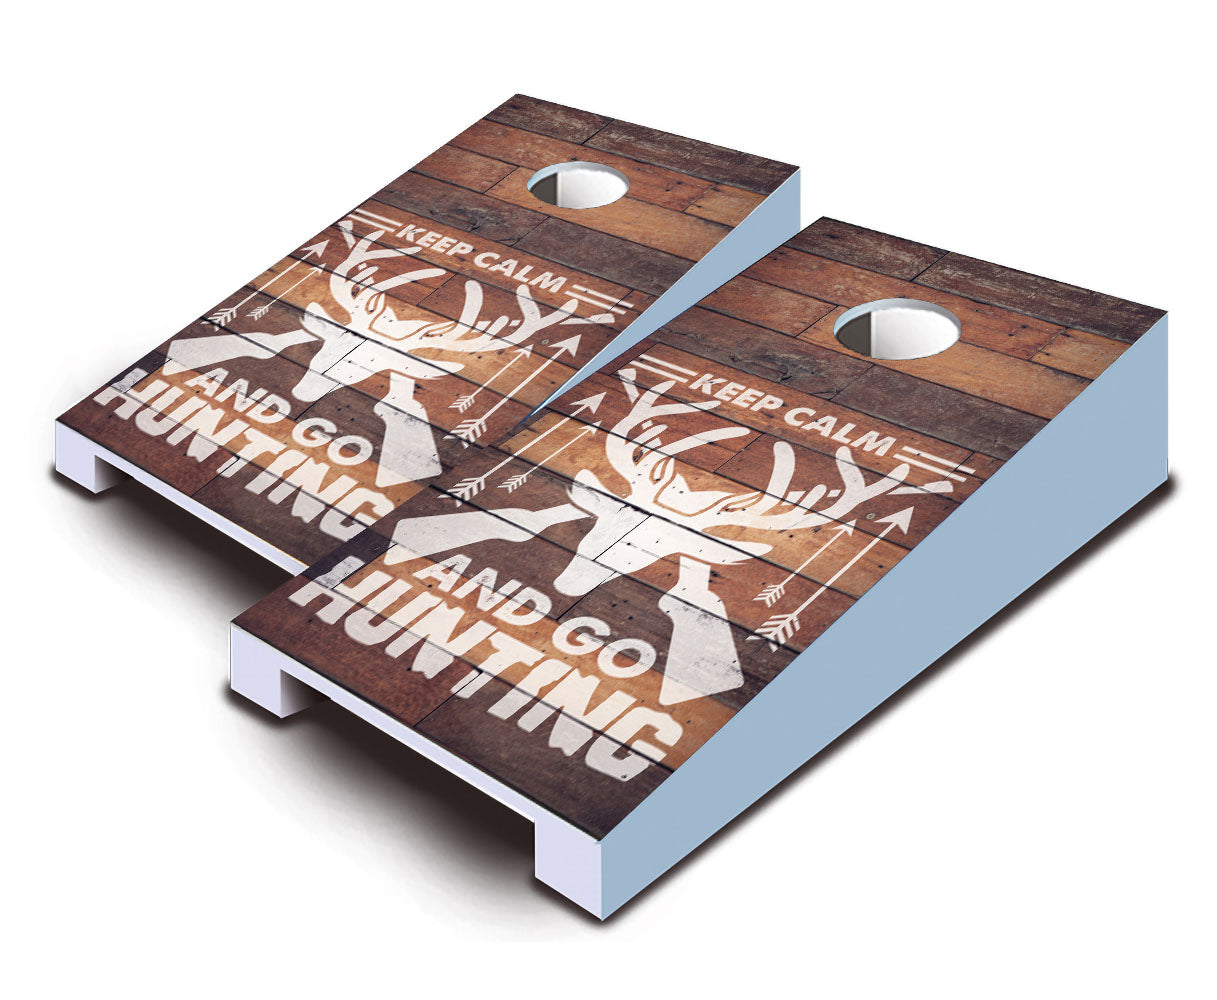 "Keep Calm and Go Hunting" Tabletop Cornhole Boards